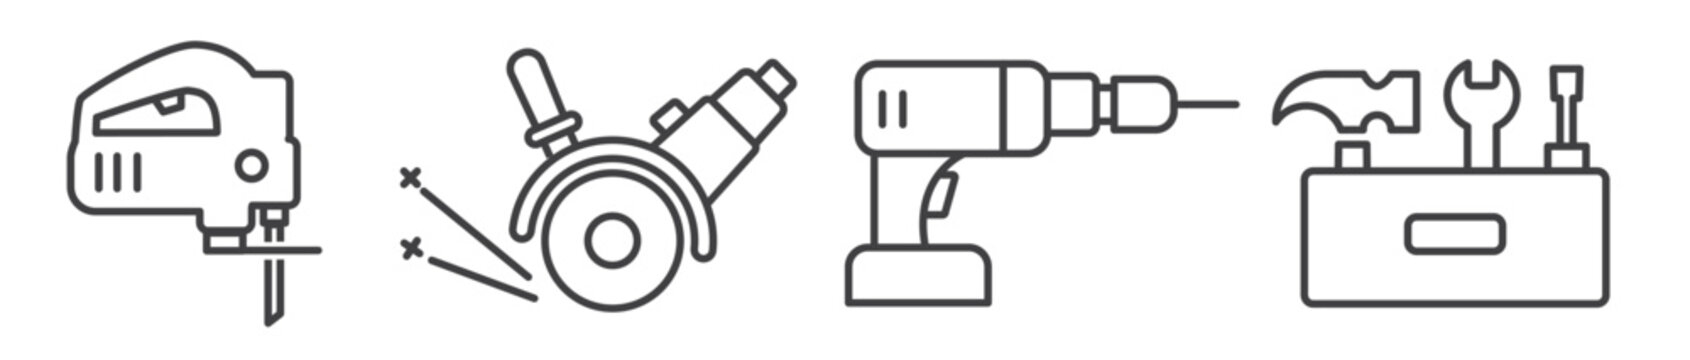 Toolkit - Power tools vector thin line icon collection on white background